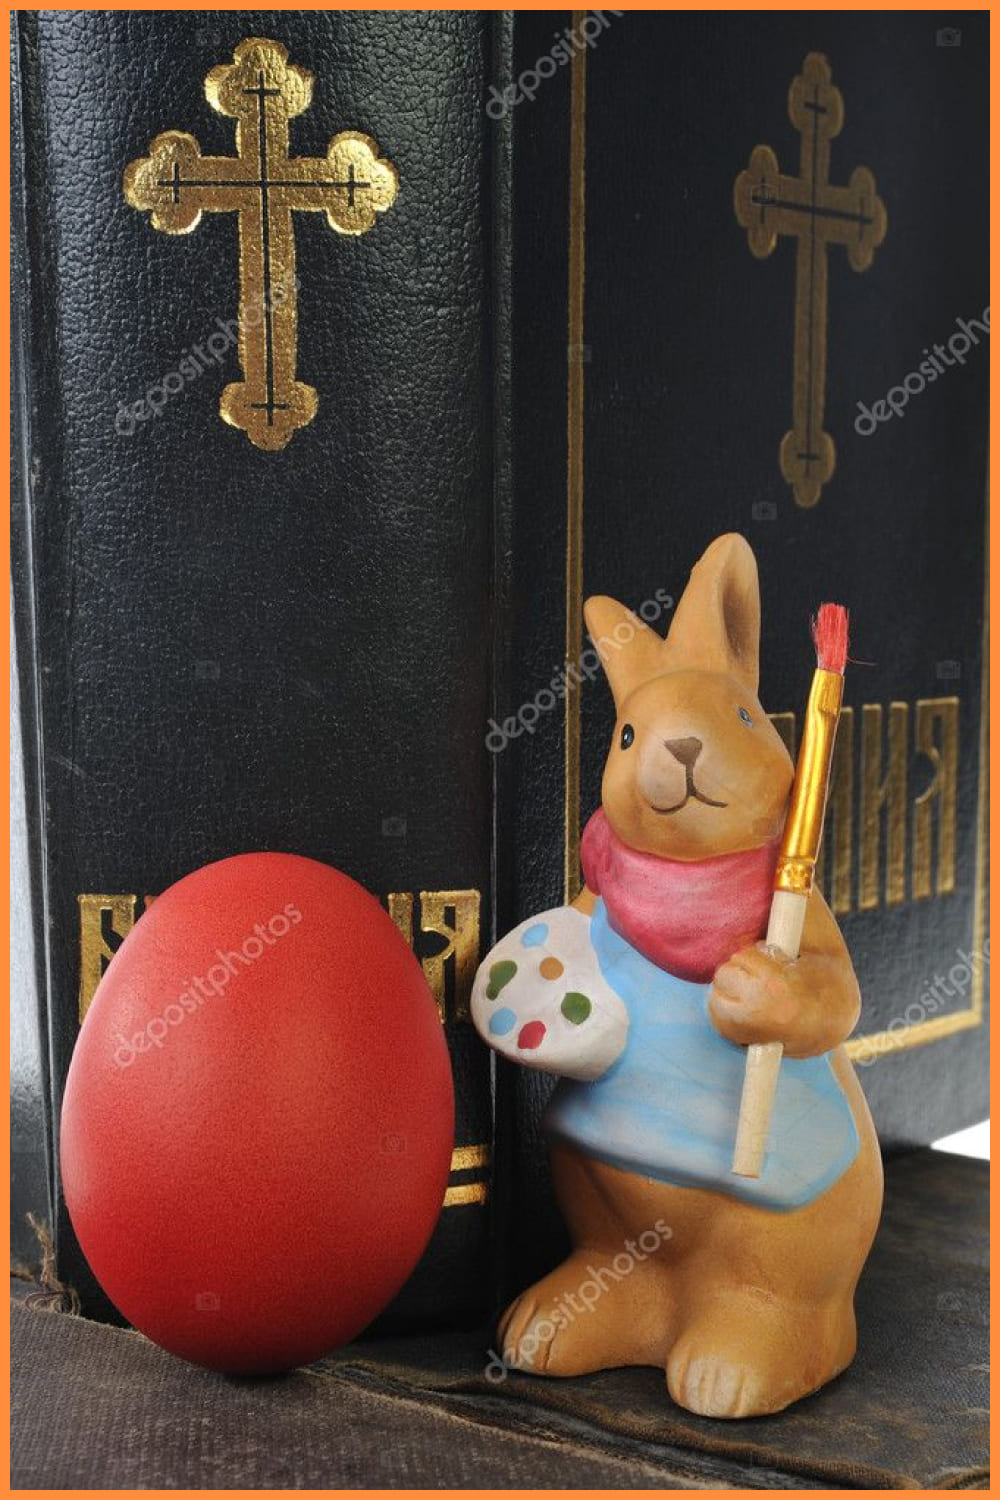 Toy rabbit with a brush and a palette near a red egg.